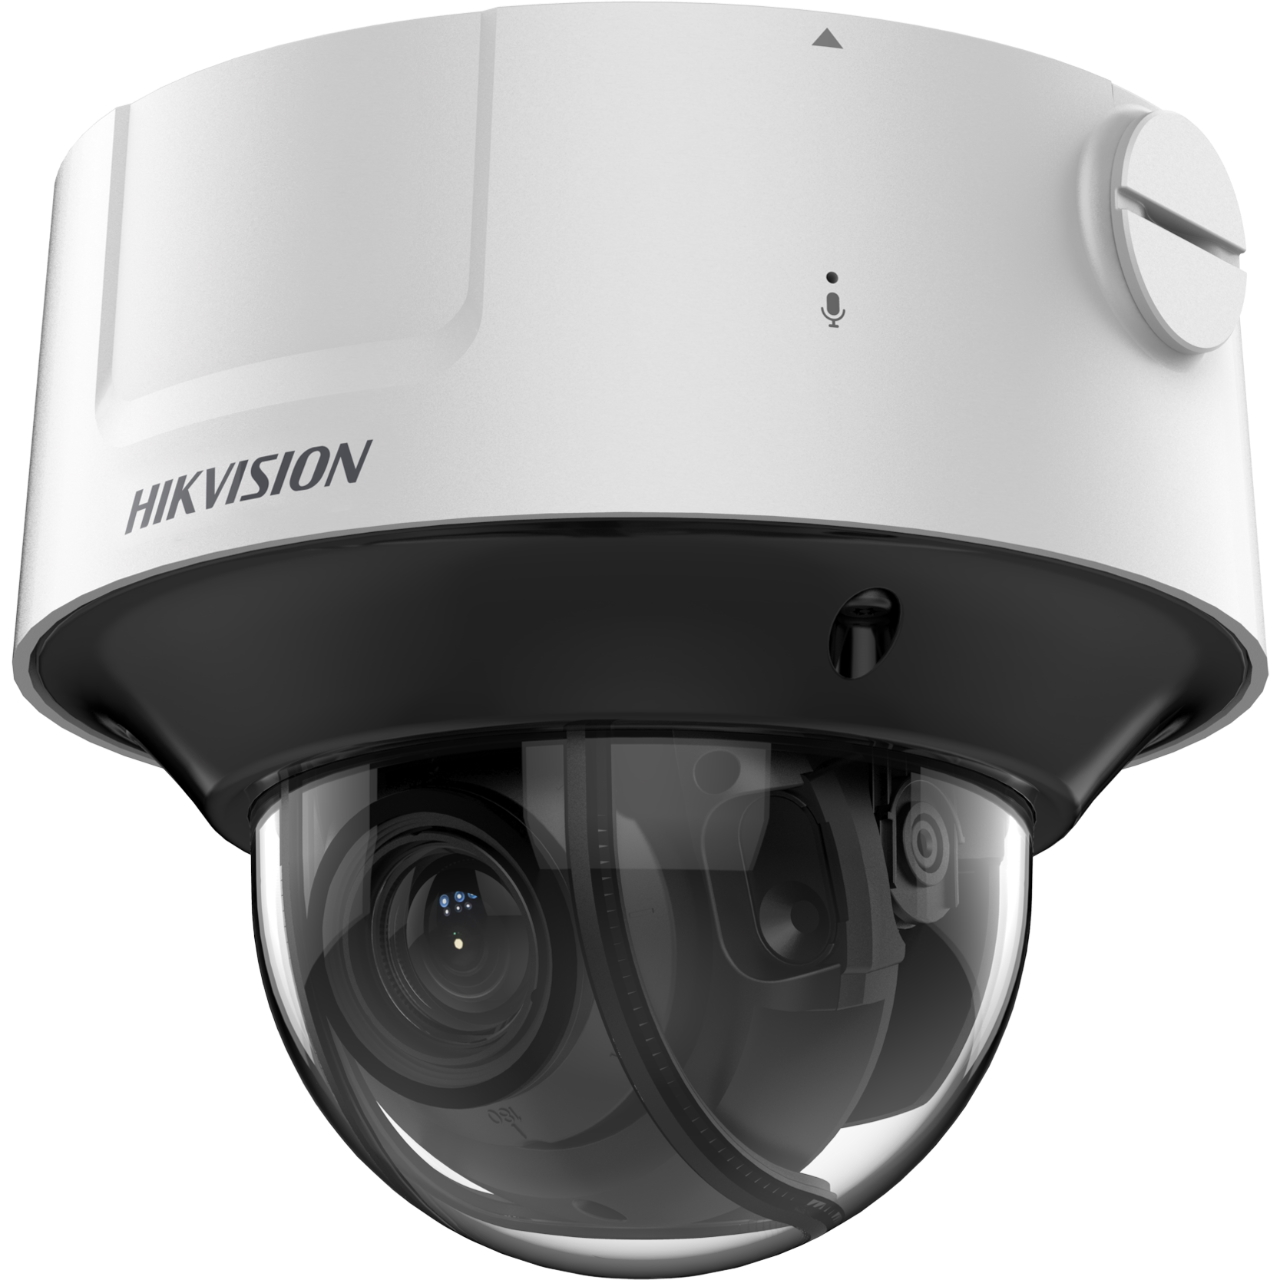 20000660 Hikvision DeepinView 8MP dome camera, VF, 2.8-12mm